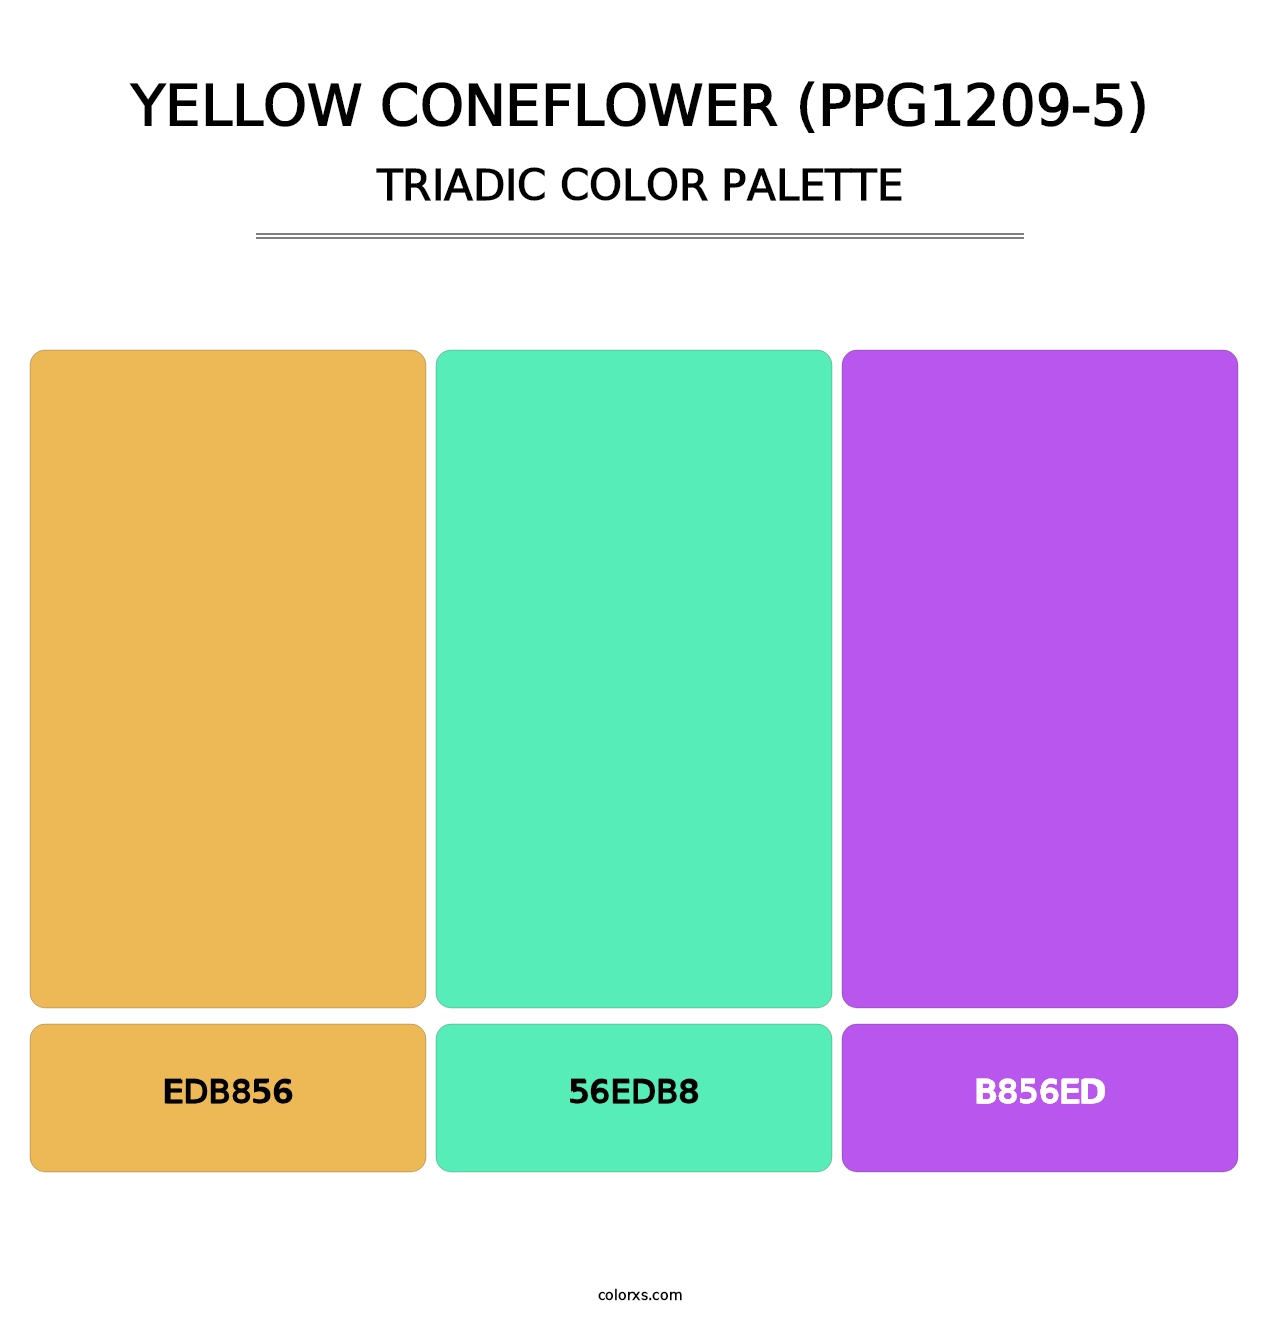 Yellow Coneflower (PPG1209-5) - Triadic Color Palette